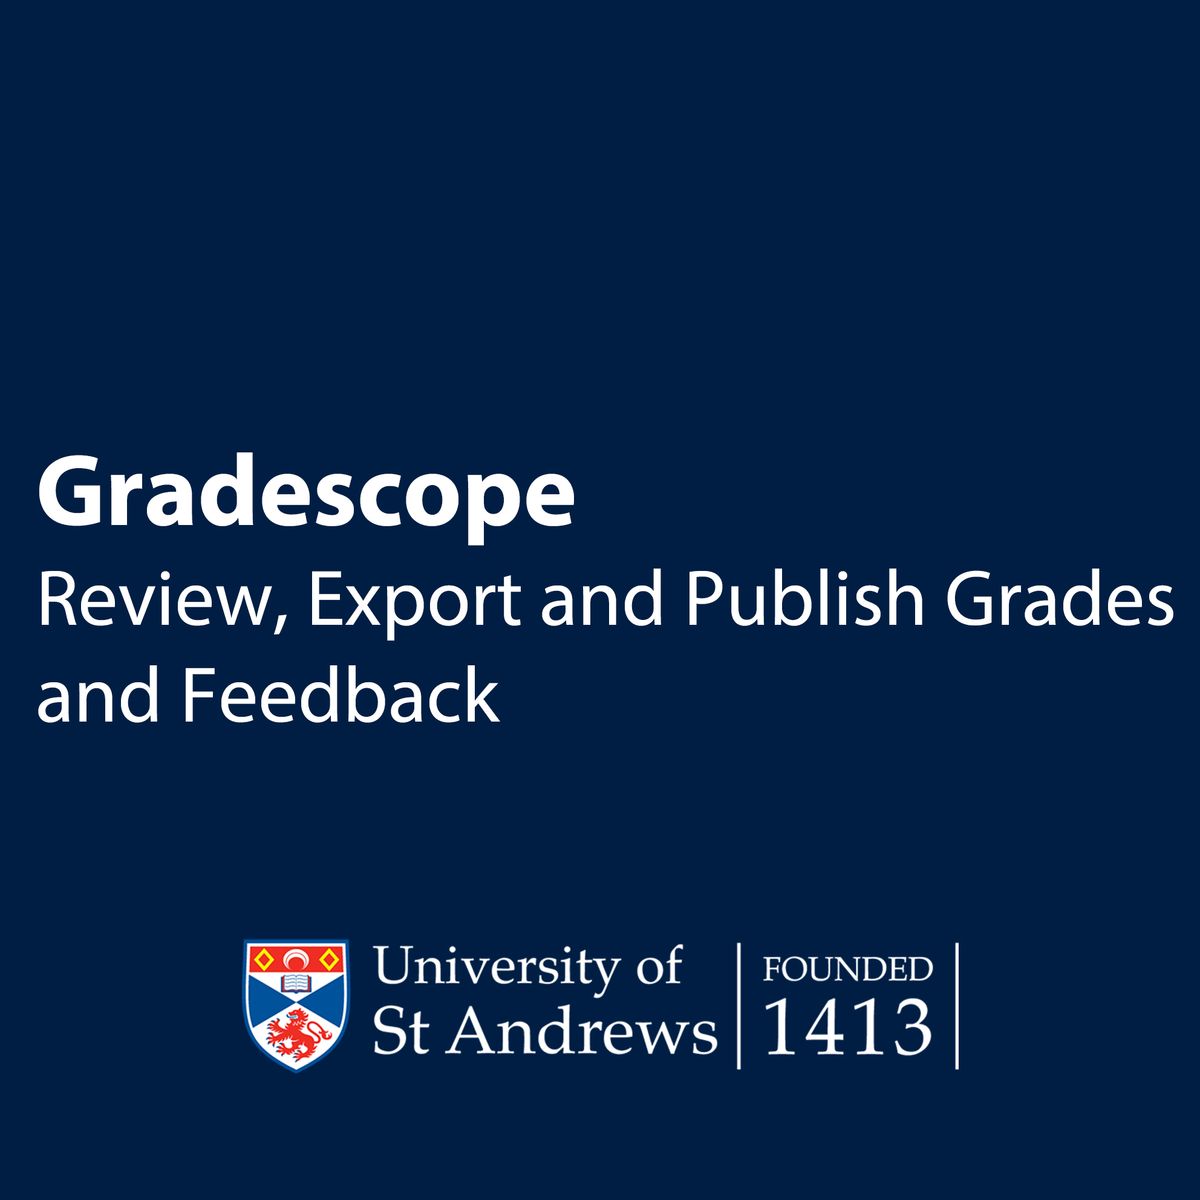 Review, Export and Publish Grades and Feedback.